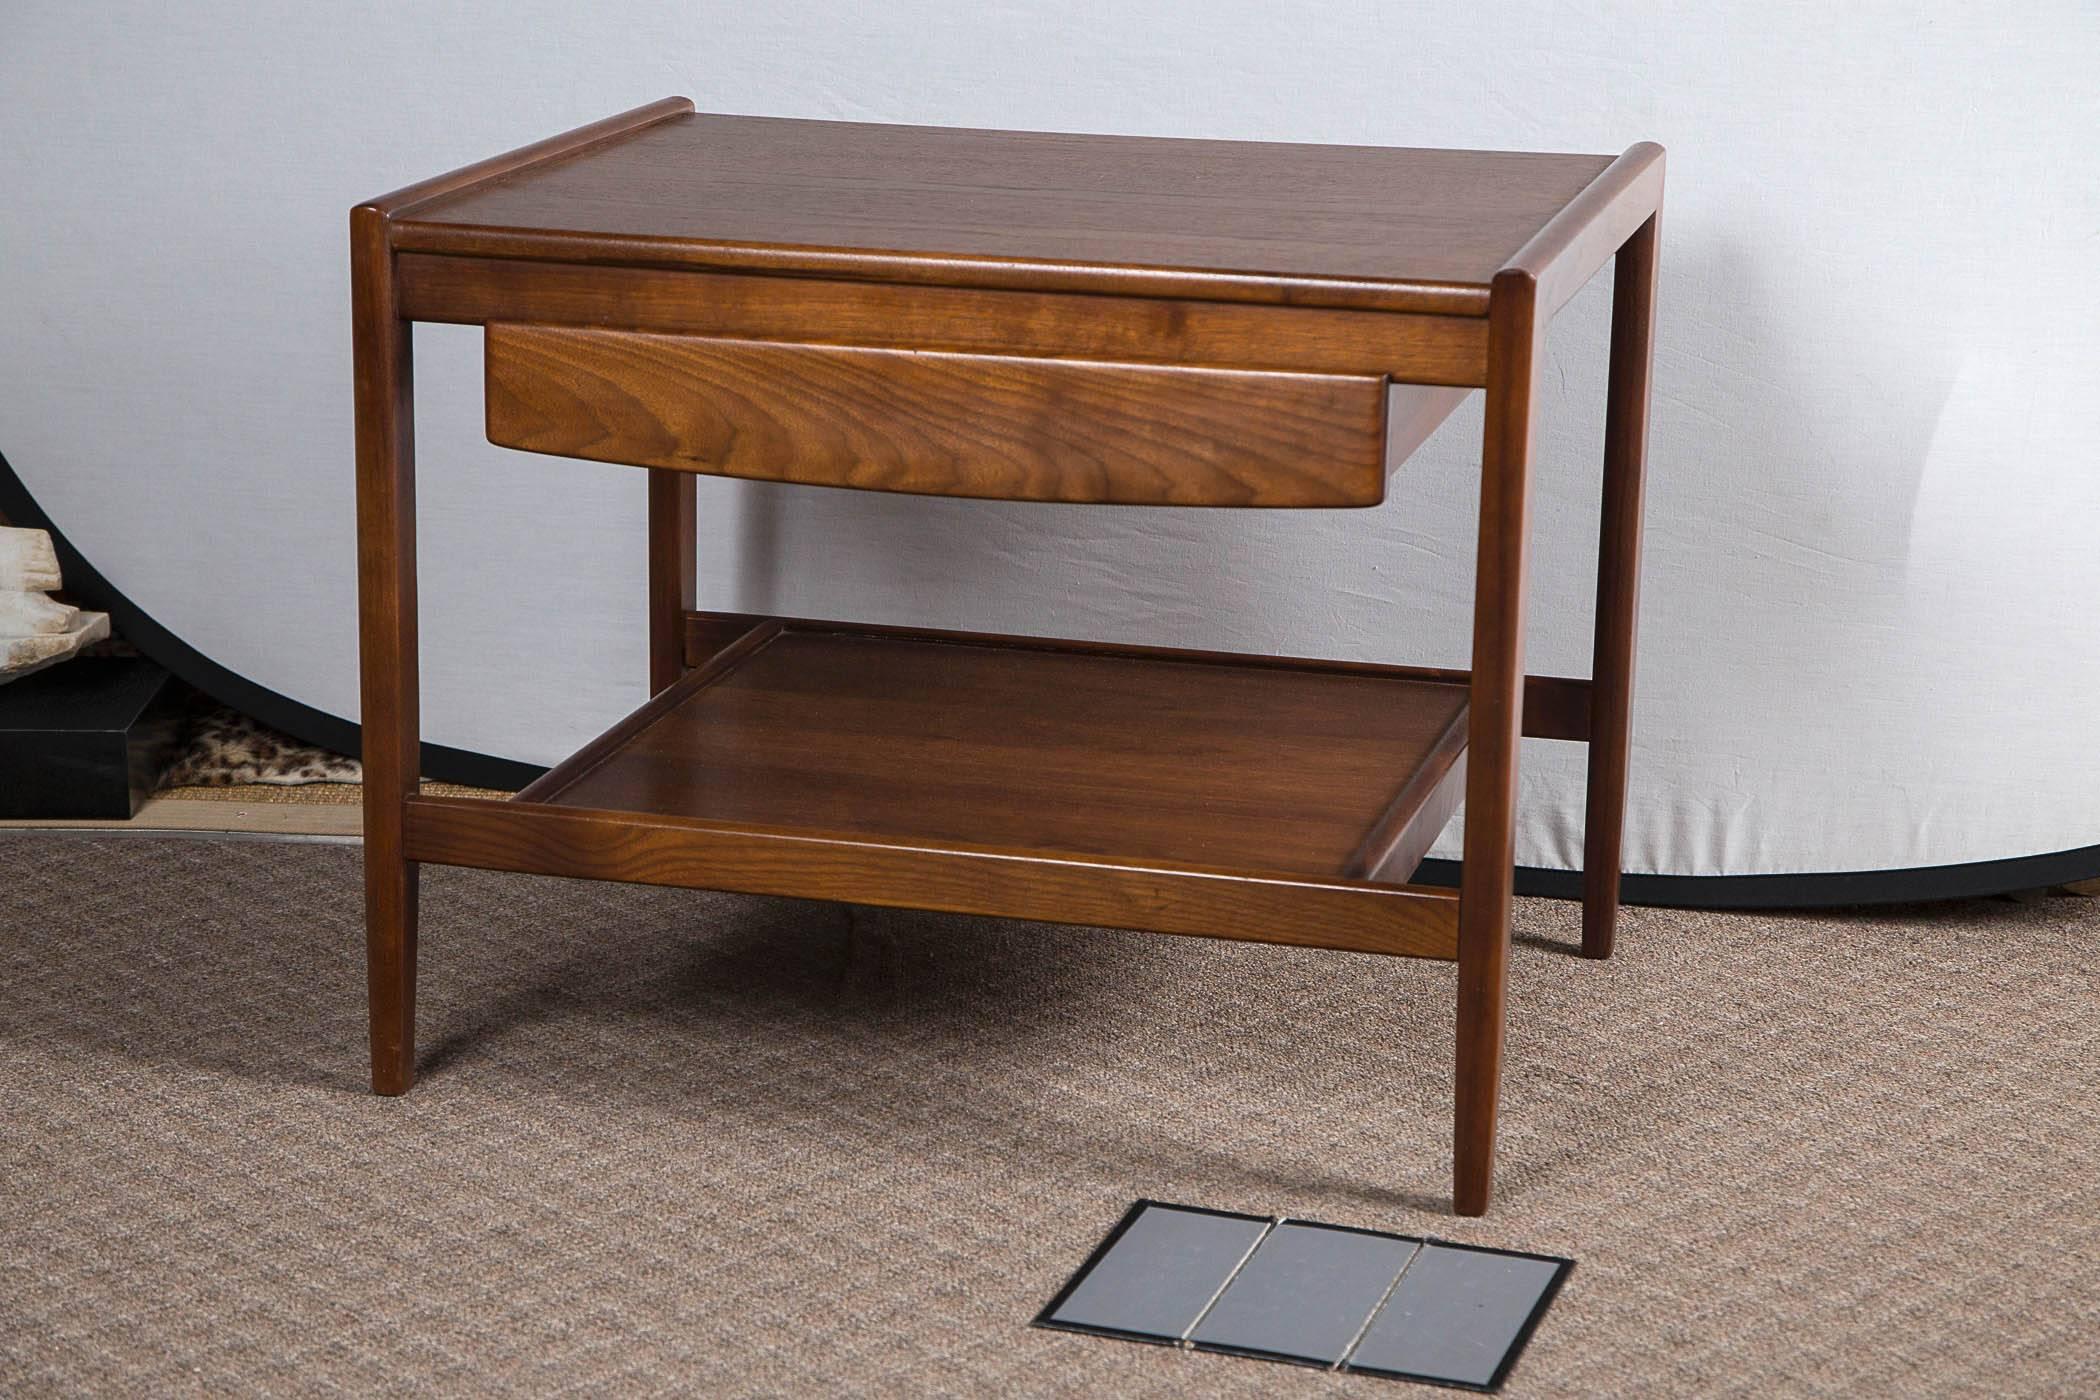 Pair of quality walnut side tables with drawer and lower shelf by John Stuart. Beautiful patina to walnut with original finish in excellent condition. Back of table is finished and duplicates detail on front.